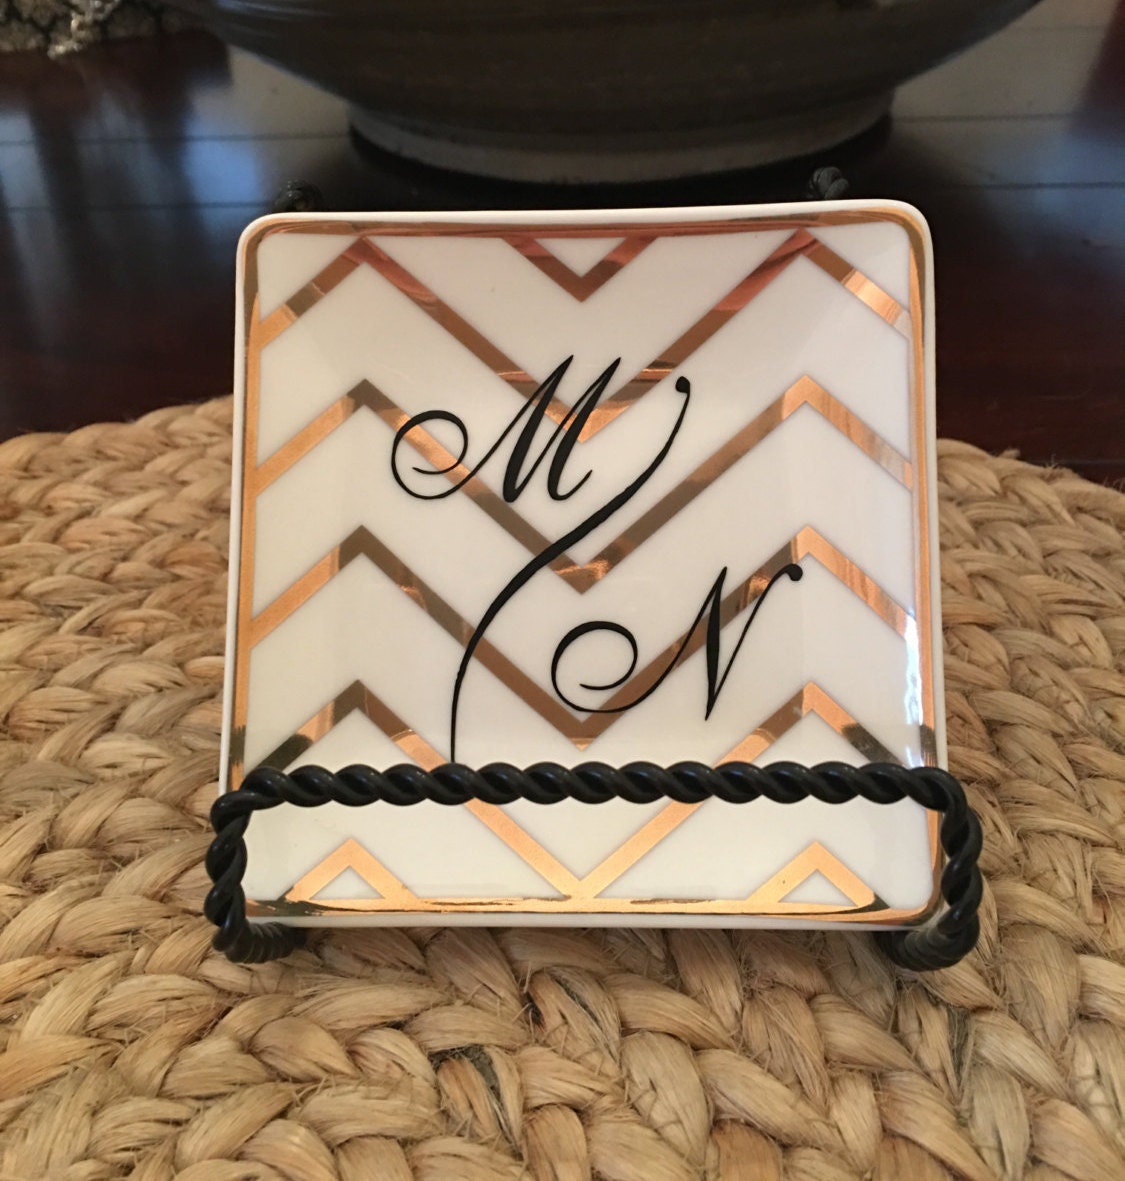 Monogrammed White and Gold small decorative ring tray/ dish